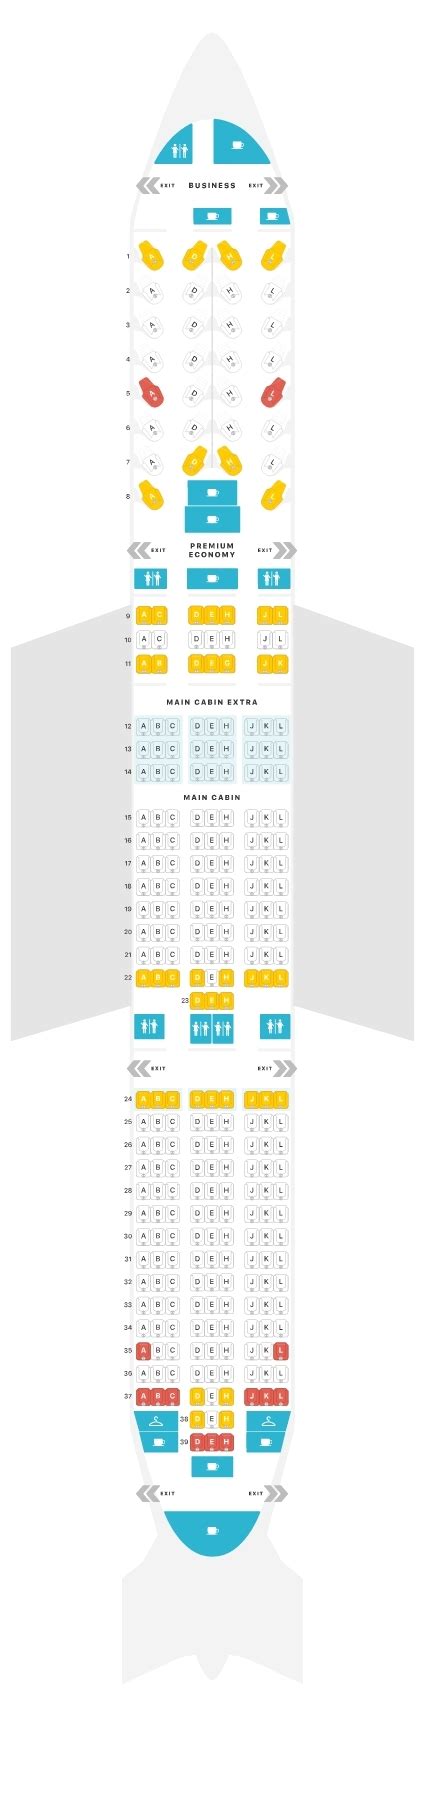 american airlines seating chart 787-9